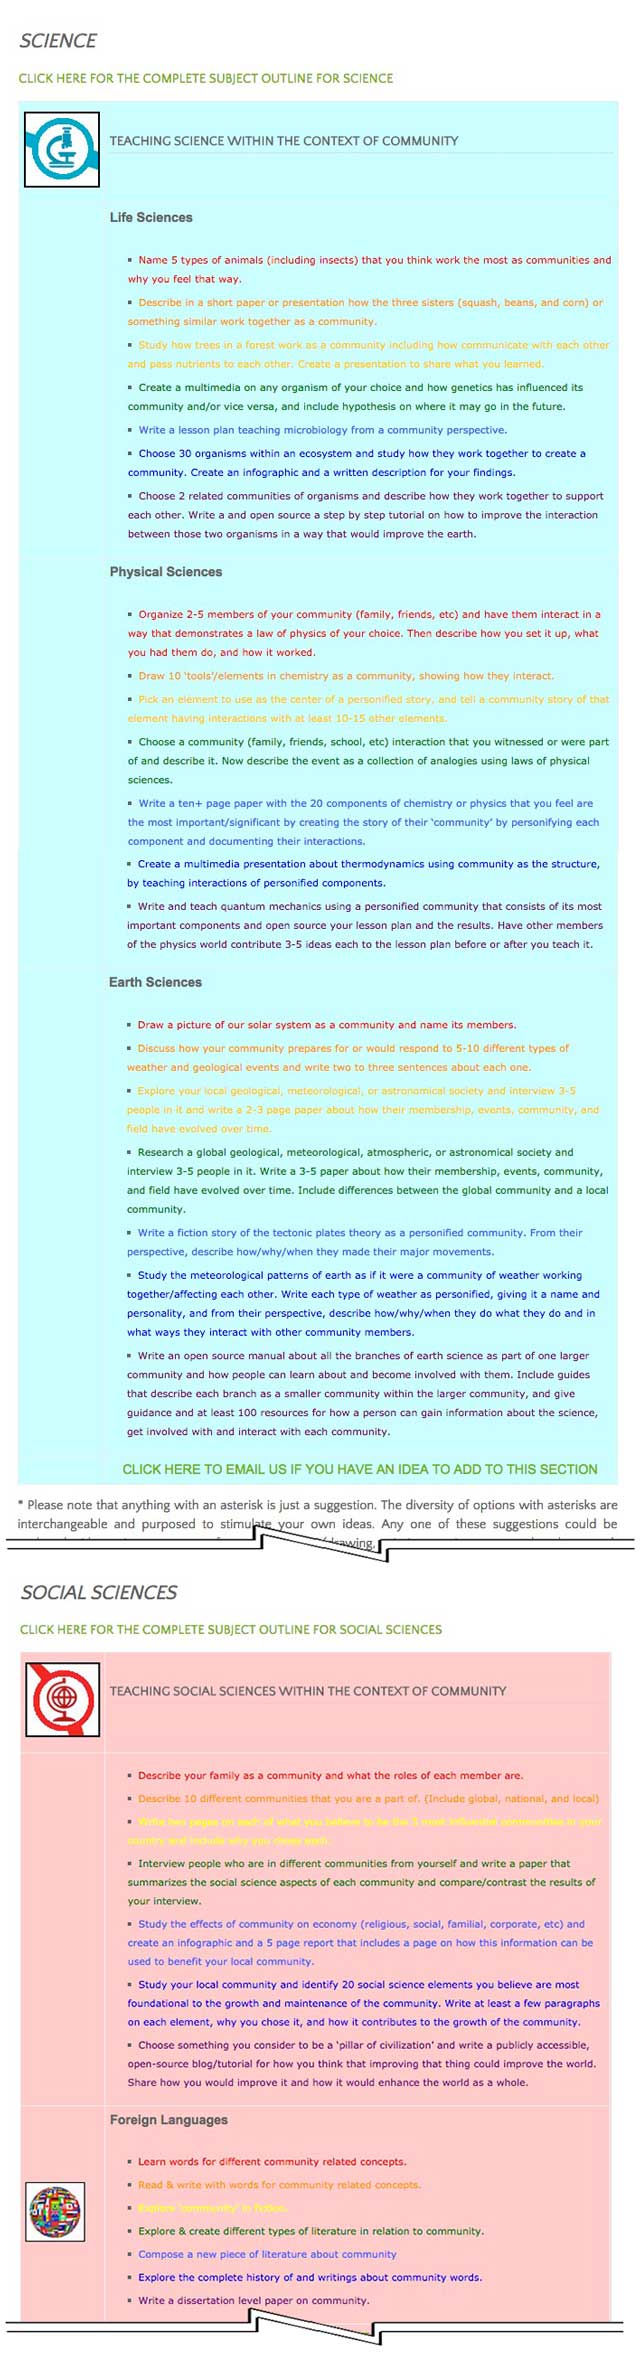 This last week the core team transferred another 25% of the written content for the Community Lesson Plan to the website, as you see here. This lesson plan is purposed to teach all subjects, to all learning levels, in any learning environment, using the central theme of “Community” and it is now 75% complete on the site.